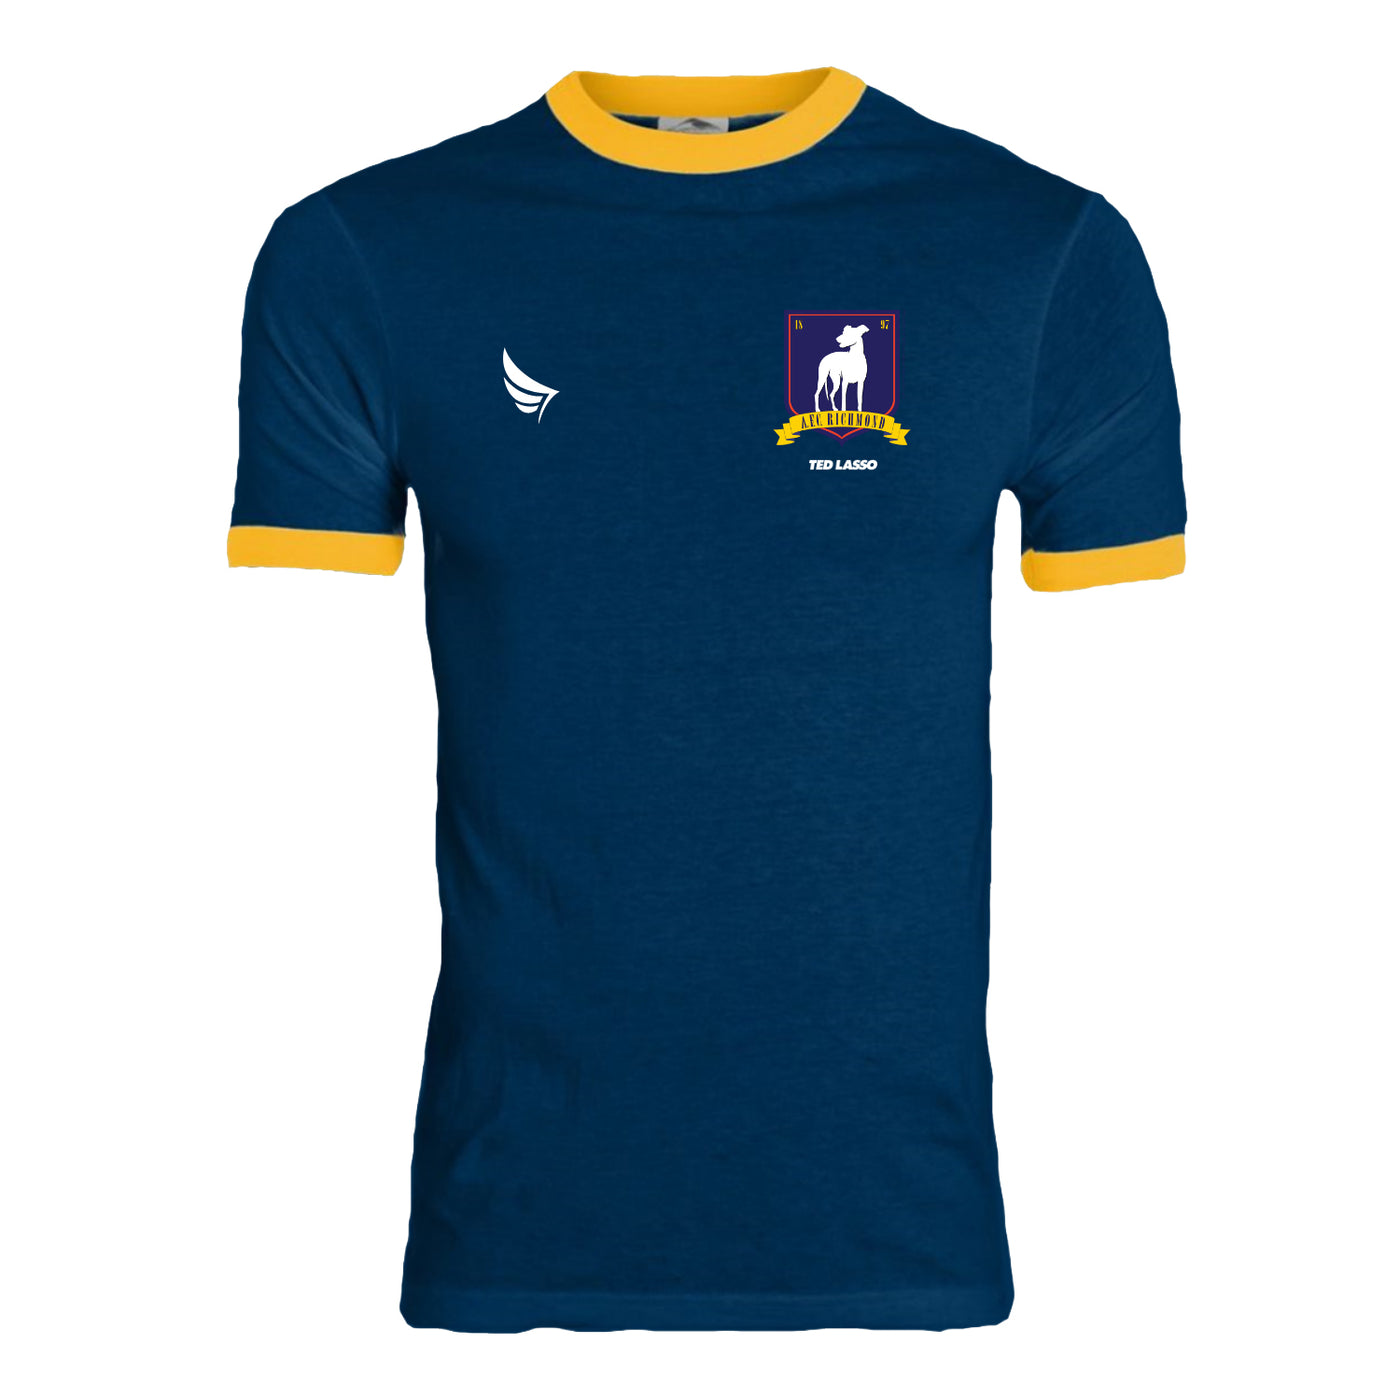 Ted Lasso A.F.C. Richmond Crest Ringer T-Shirt Navy Gold